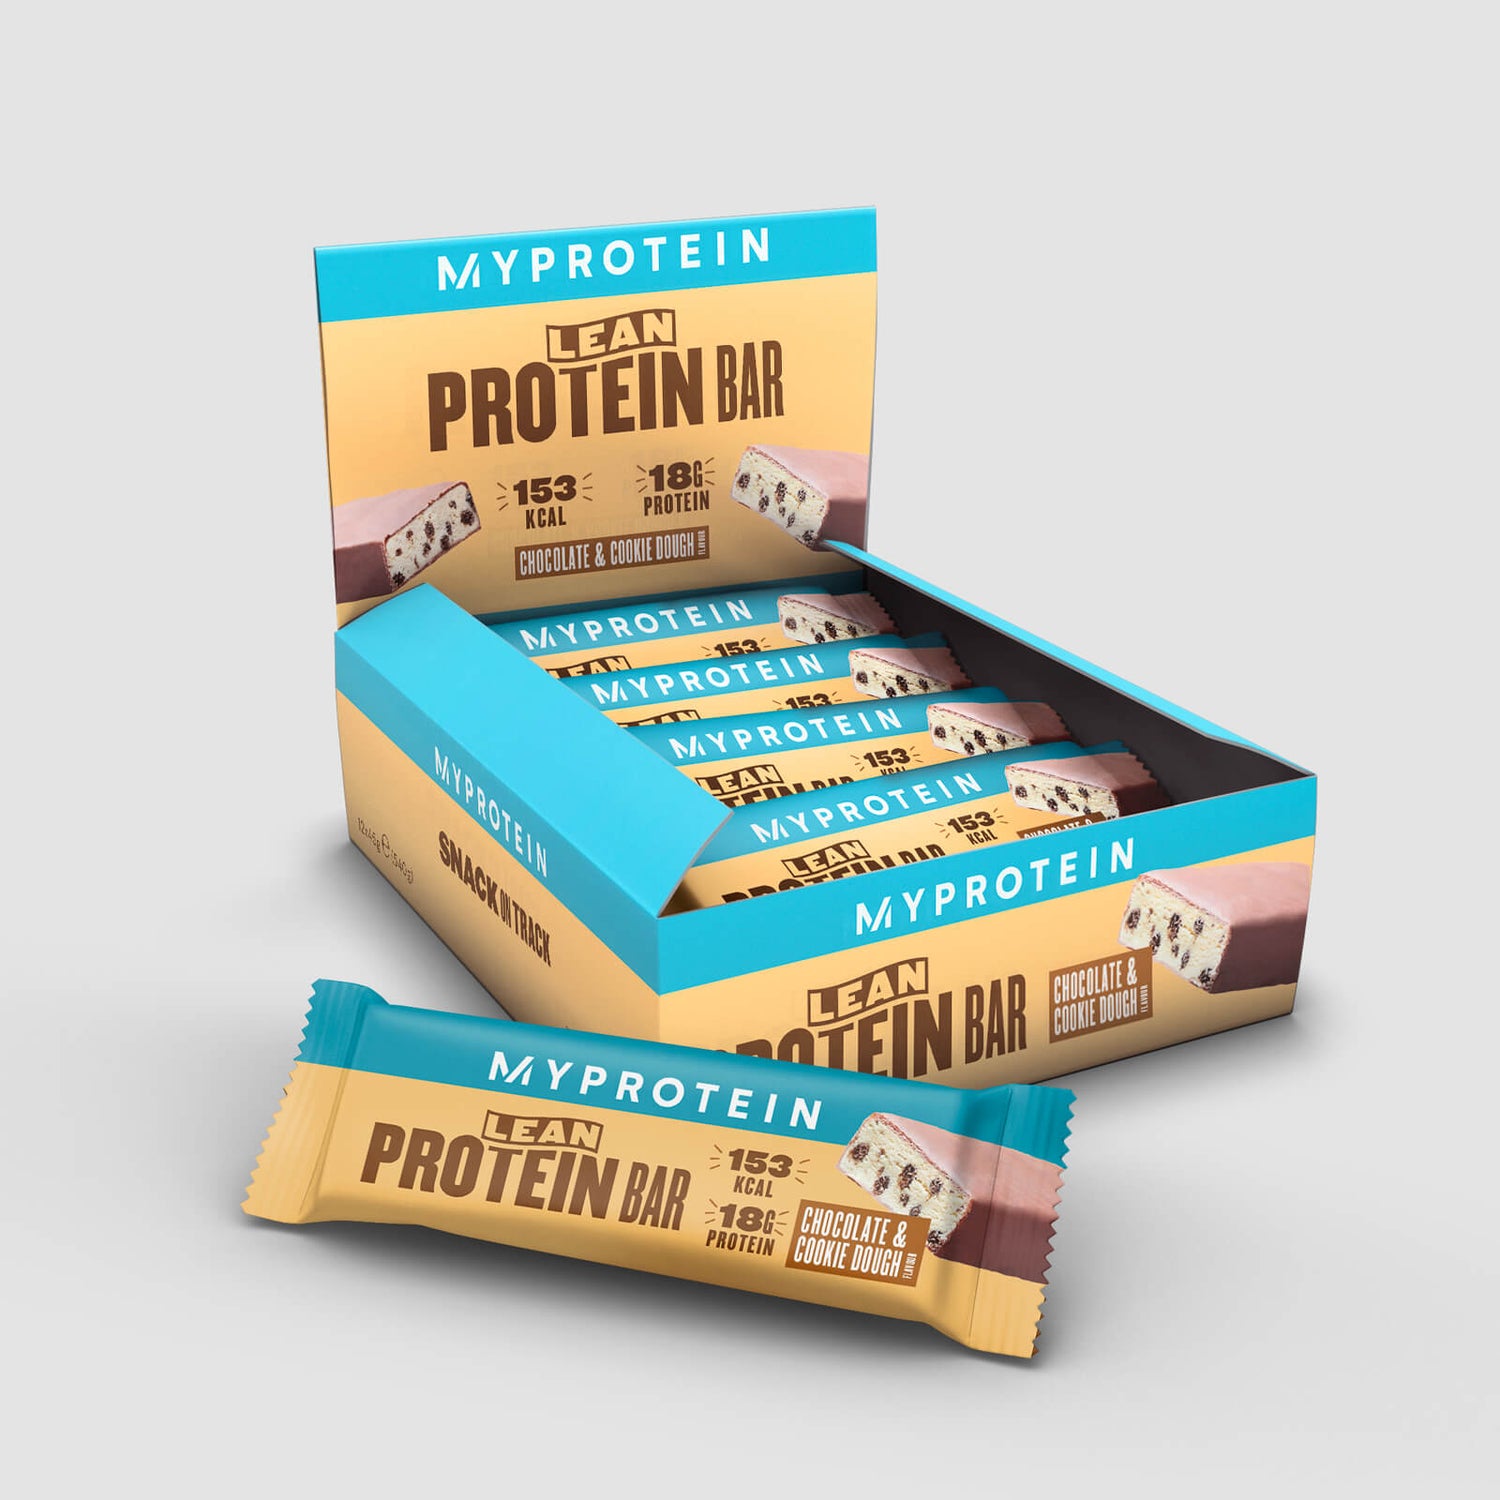 Baton proteic lean - 12 x 45g - Chocolate and Cookie Dough